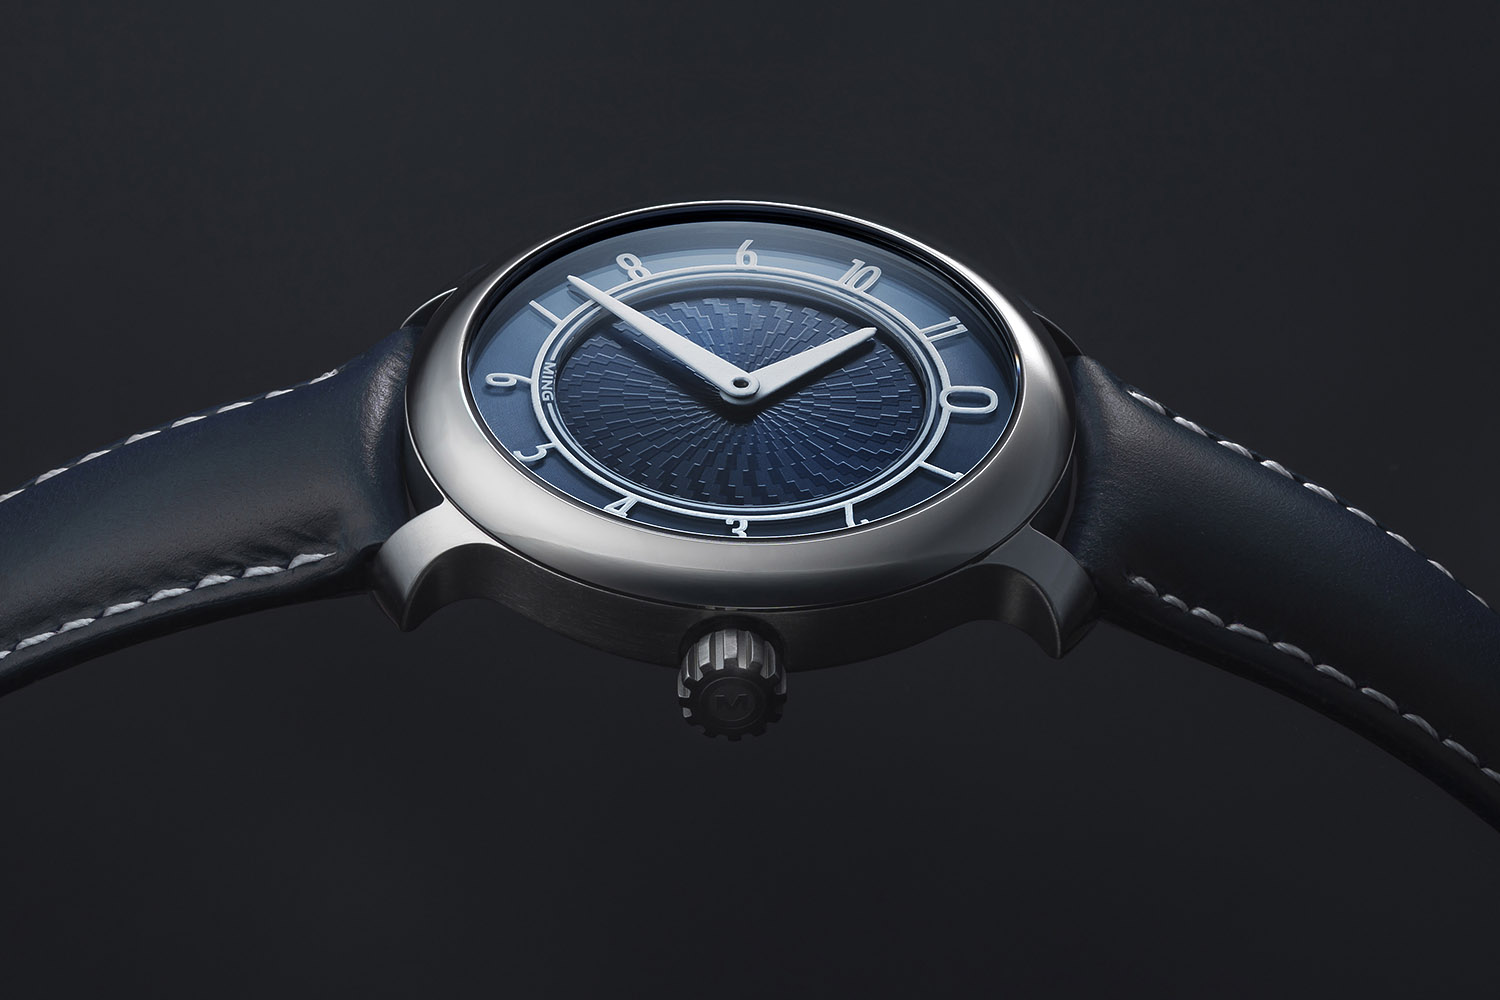 Ming 17.01 - Created by Famed Watch Photographer Ming Thein